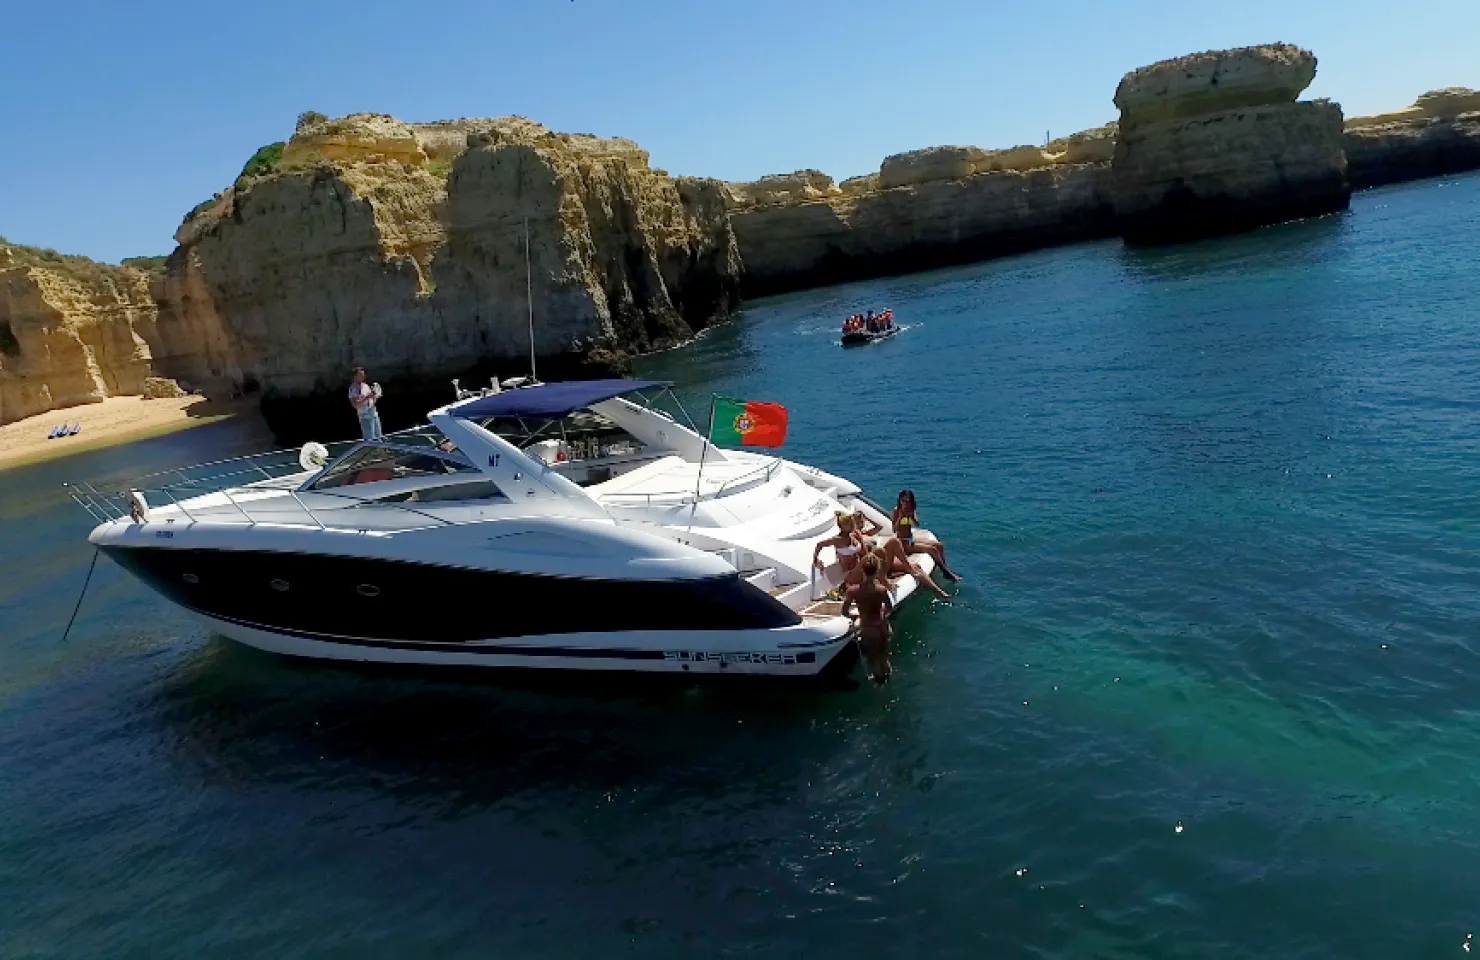 Afternoon Luxury Cruise - Yacht Charters in the Algarve. 